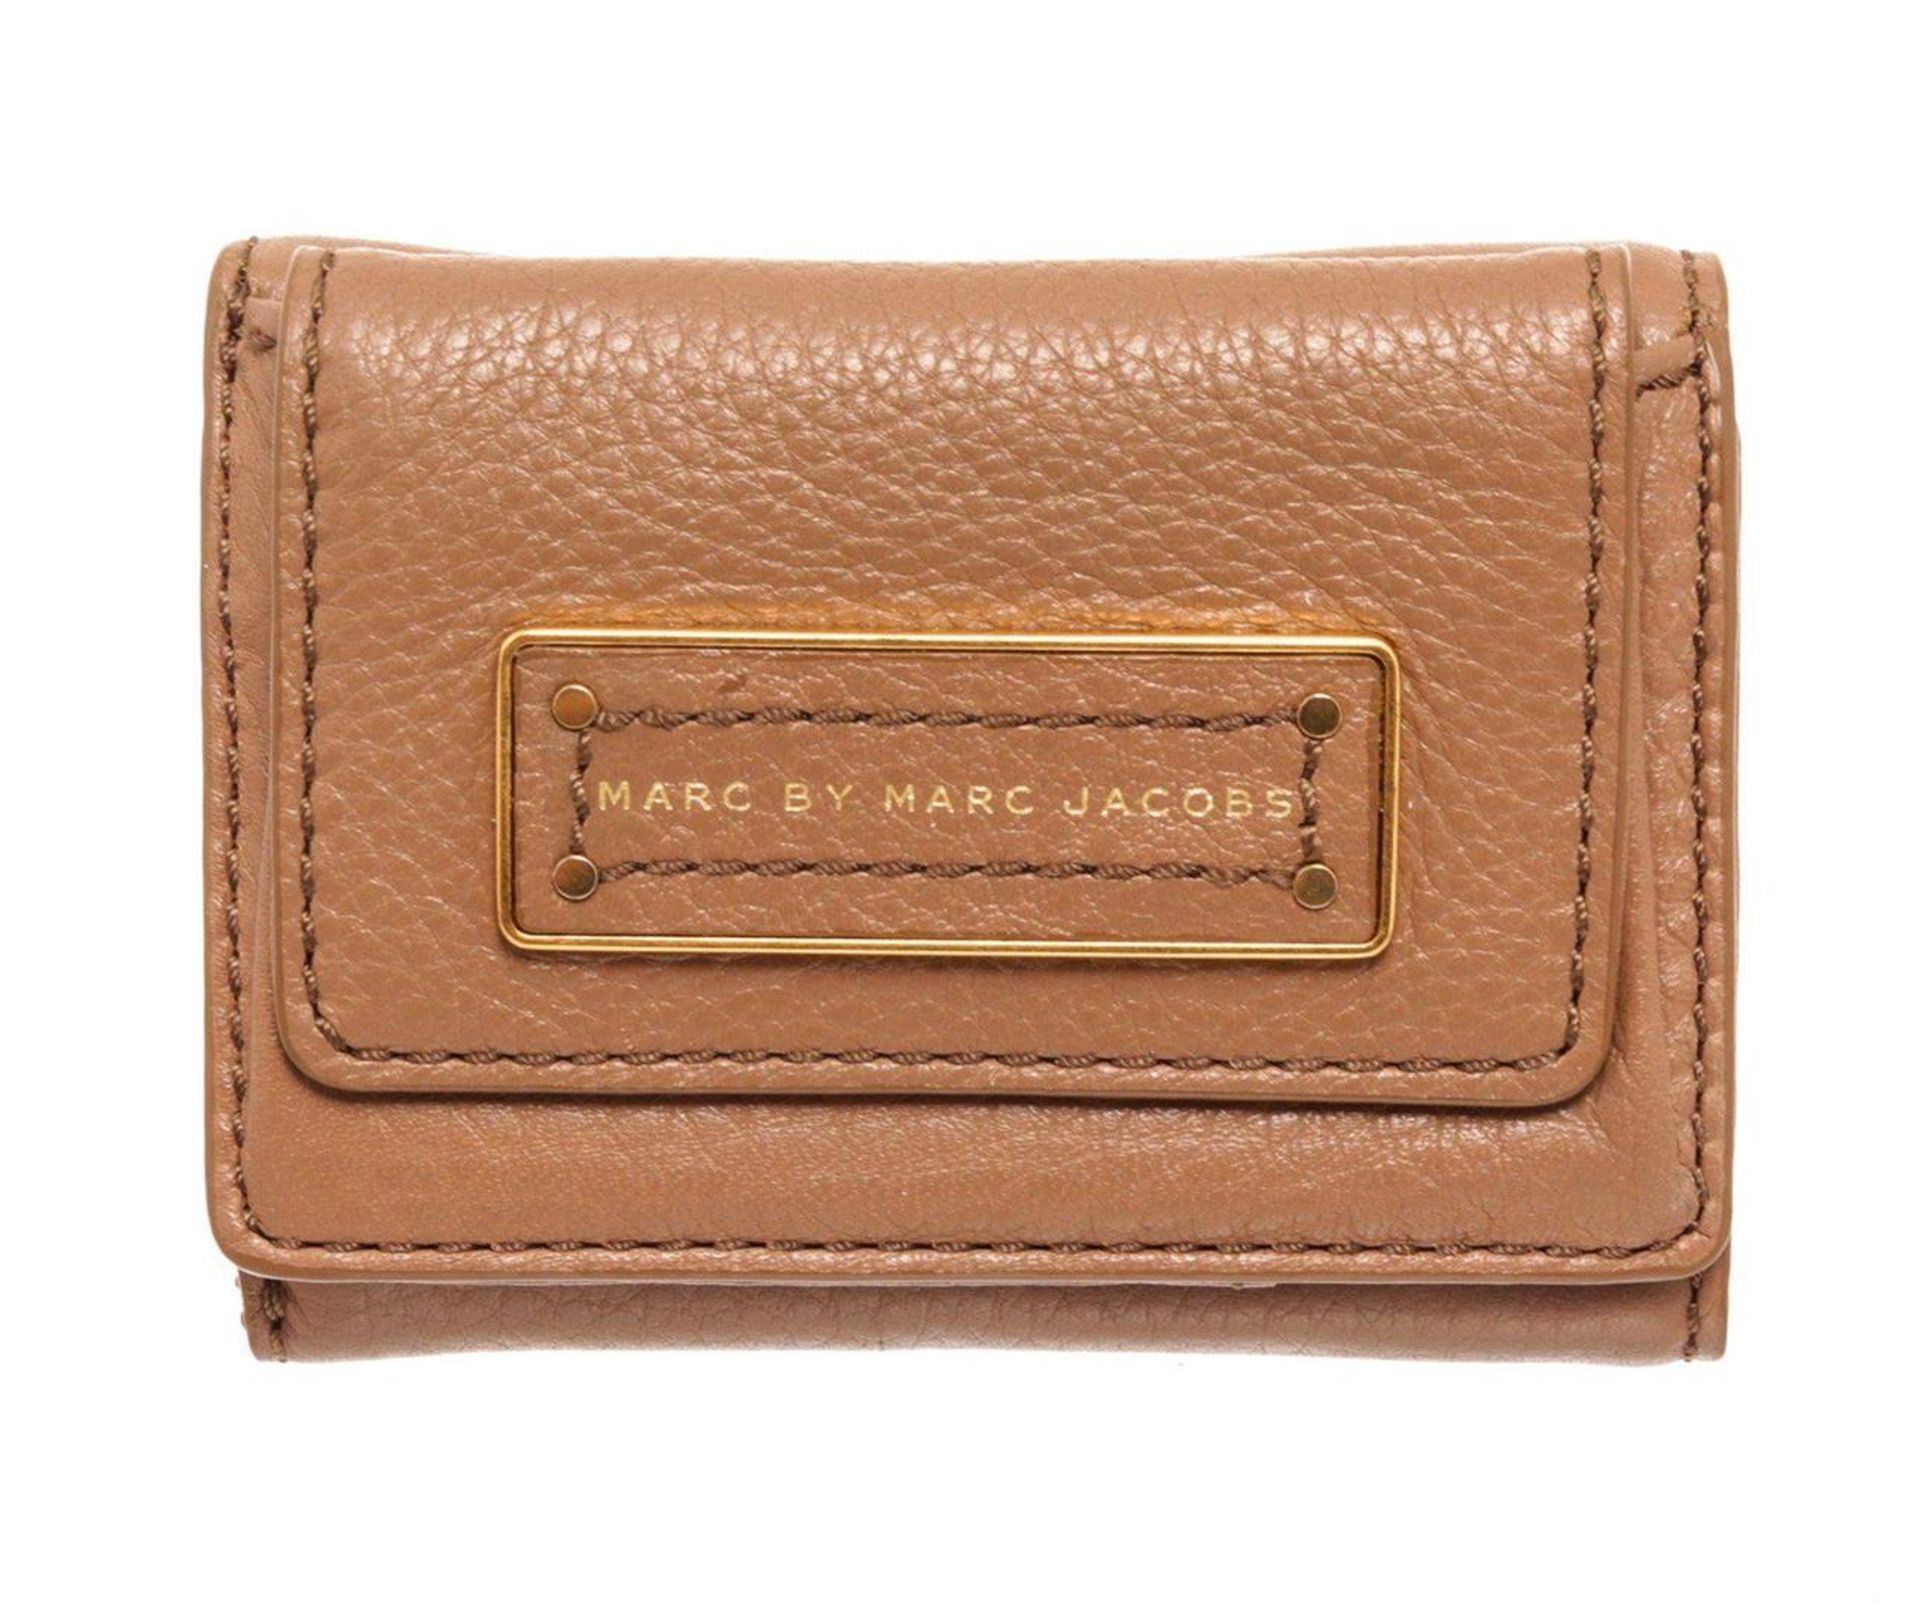 Marc By Marc Jacobs Brown Leather Mini Compact Flap Wallet